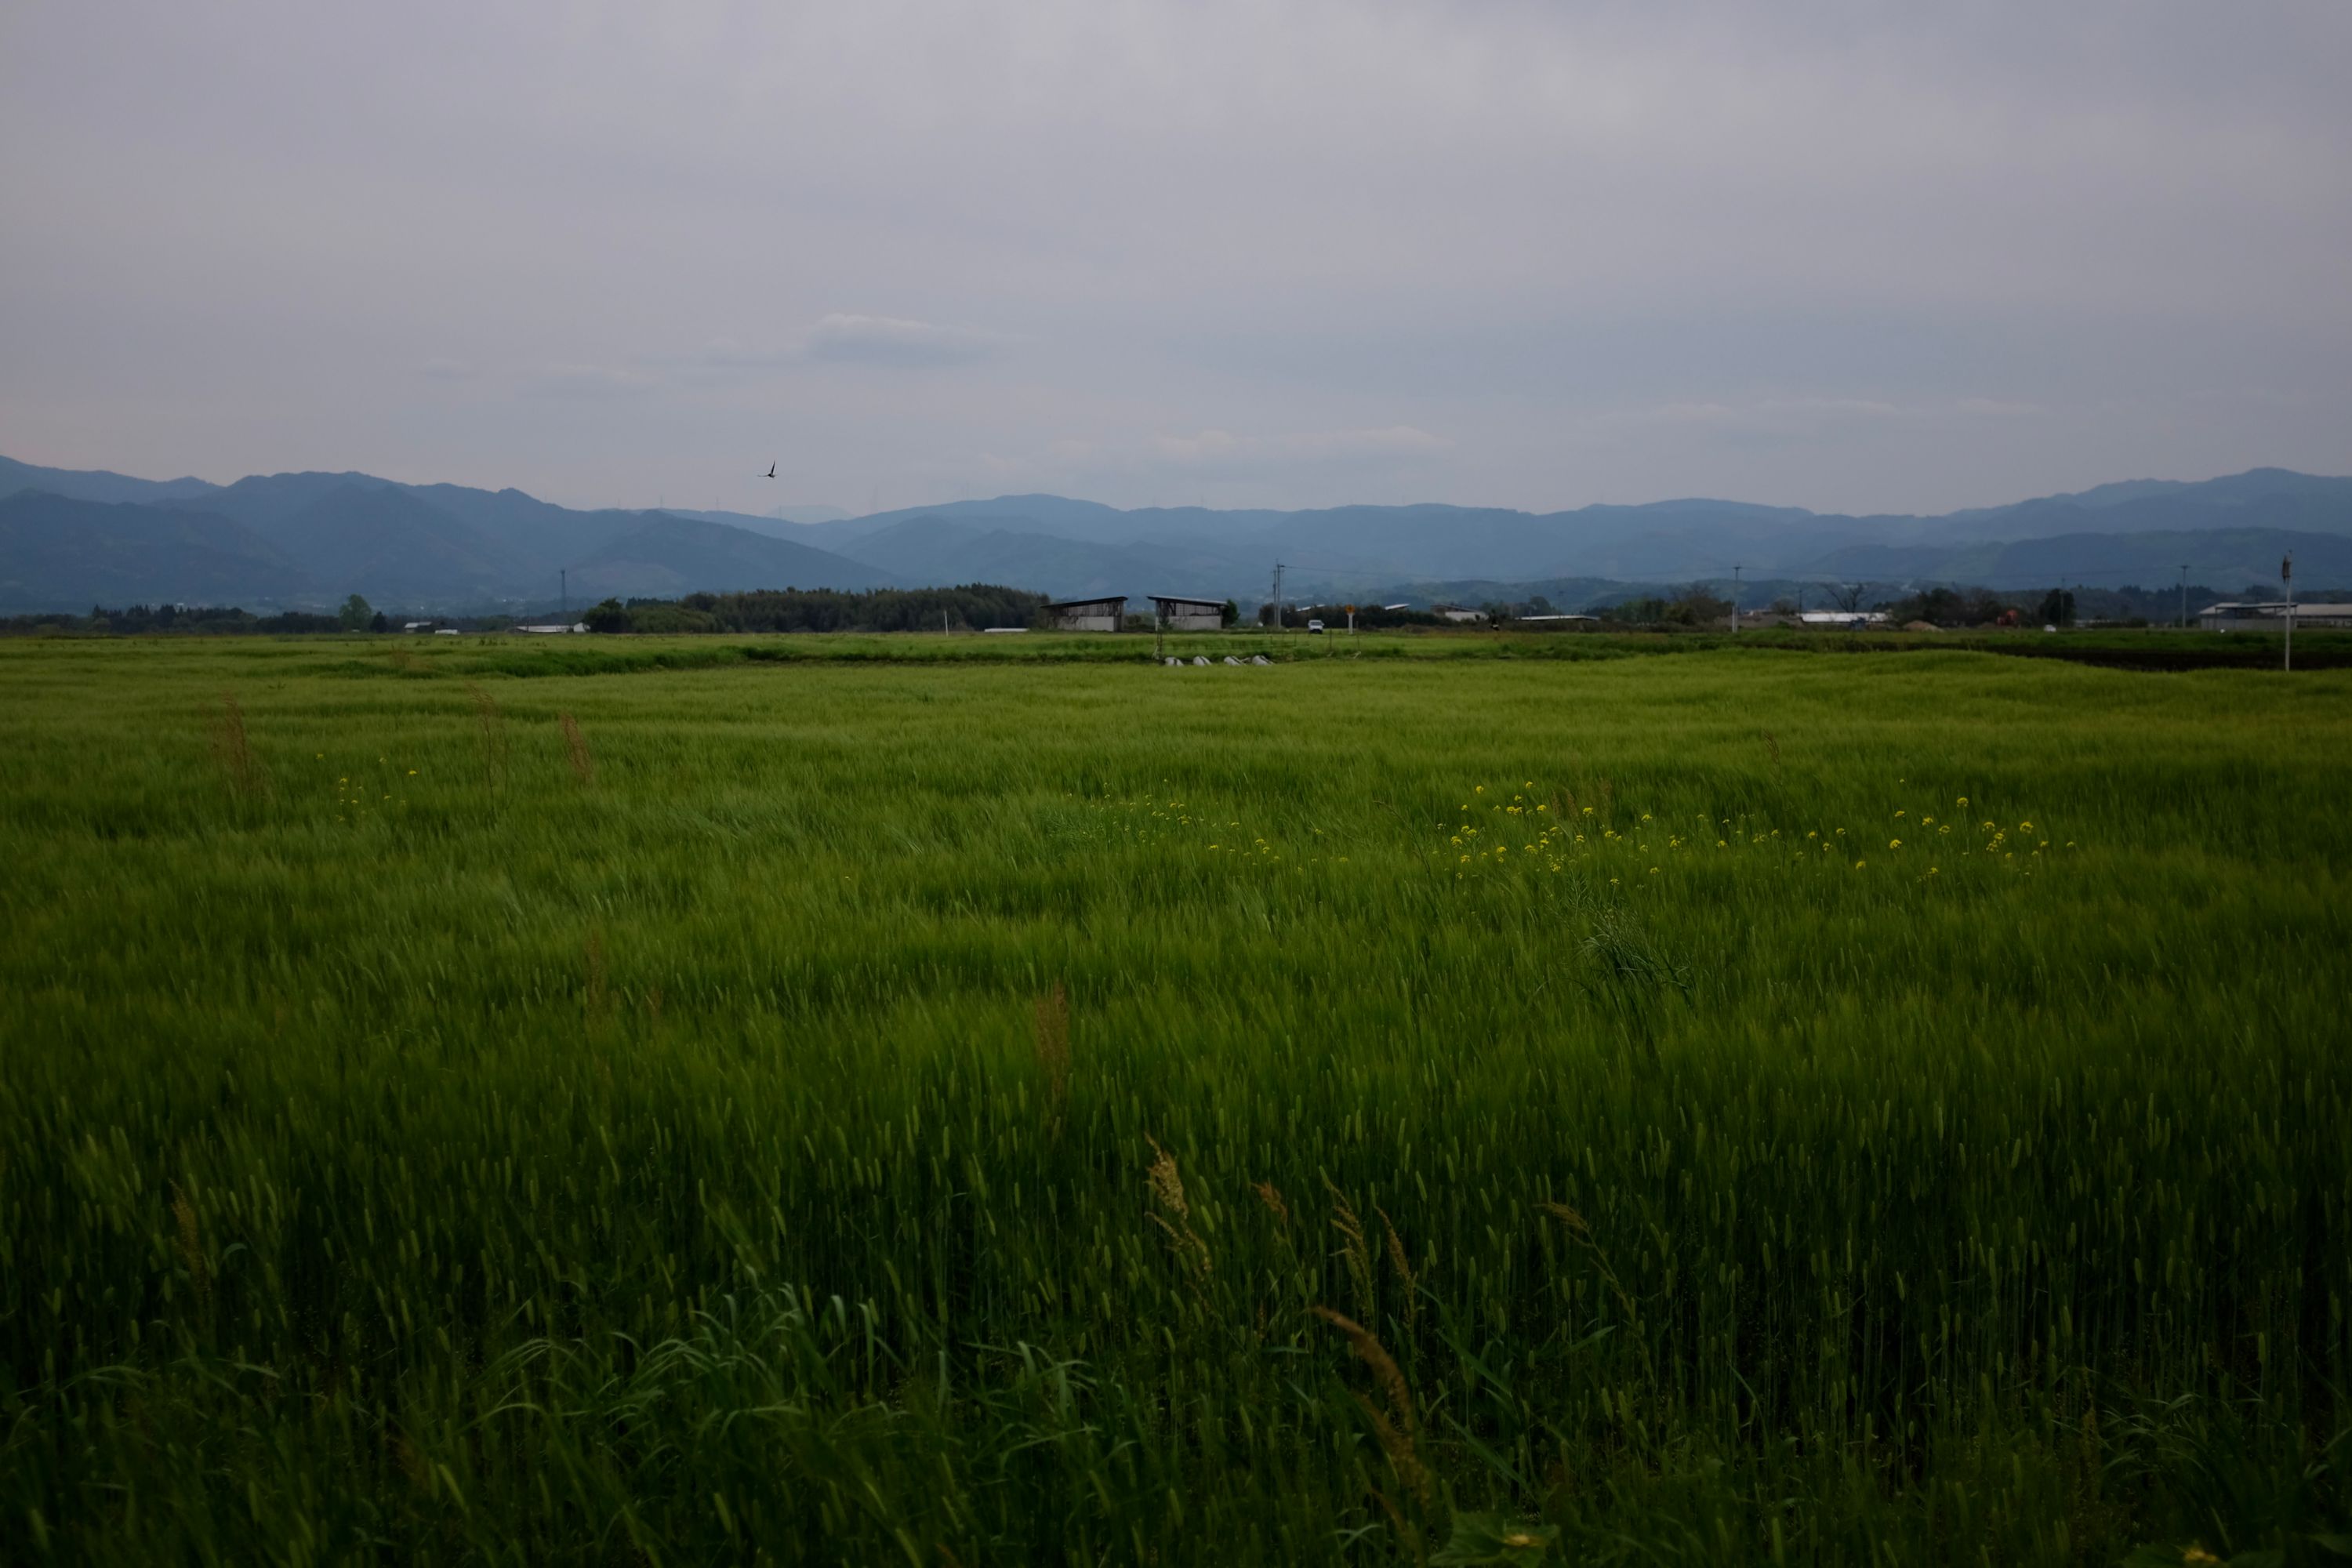 Green fields of rice against a background of mountains.